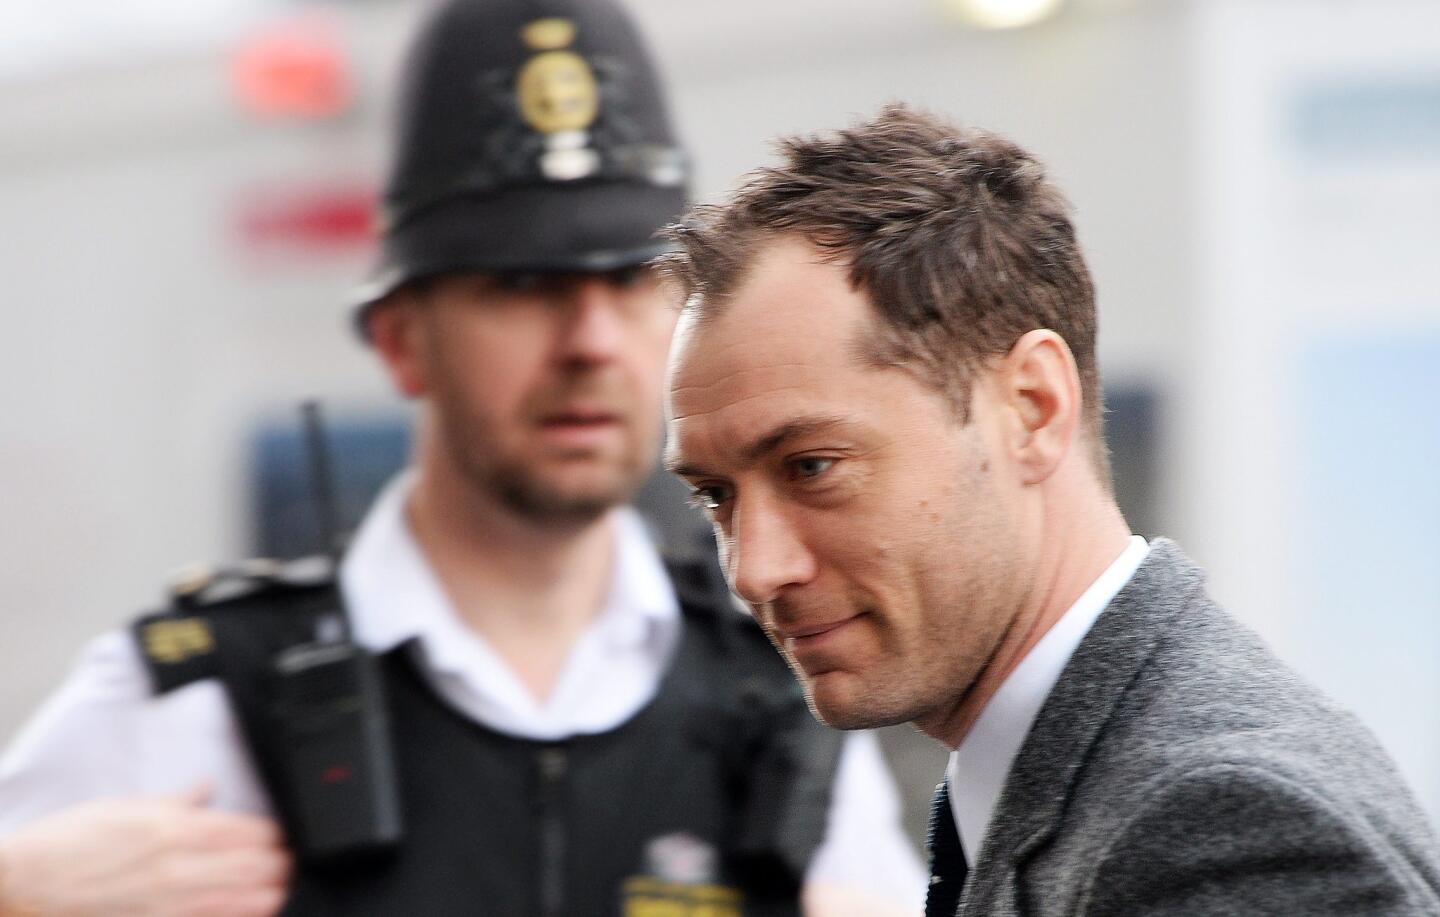 Jude Law arrives at Old Bailey in hacking trial